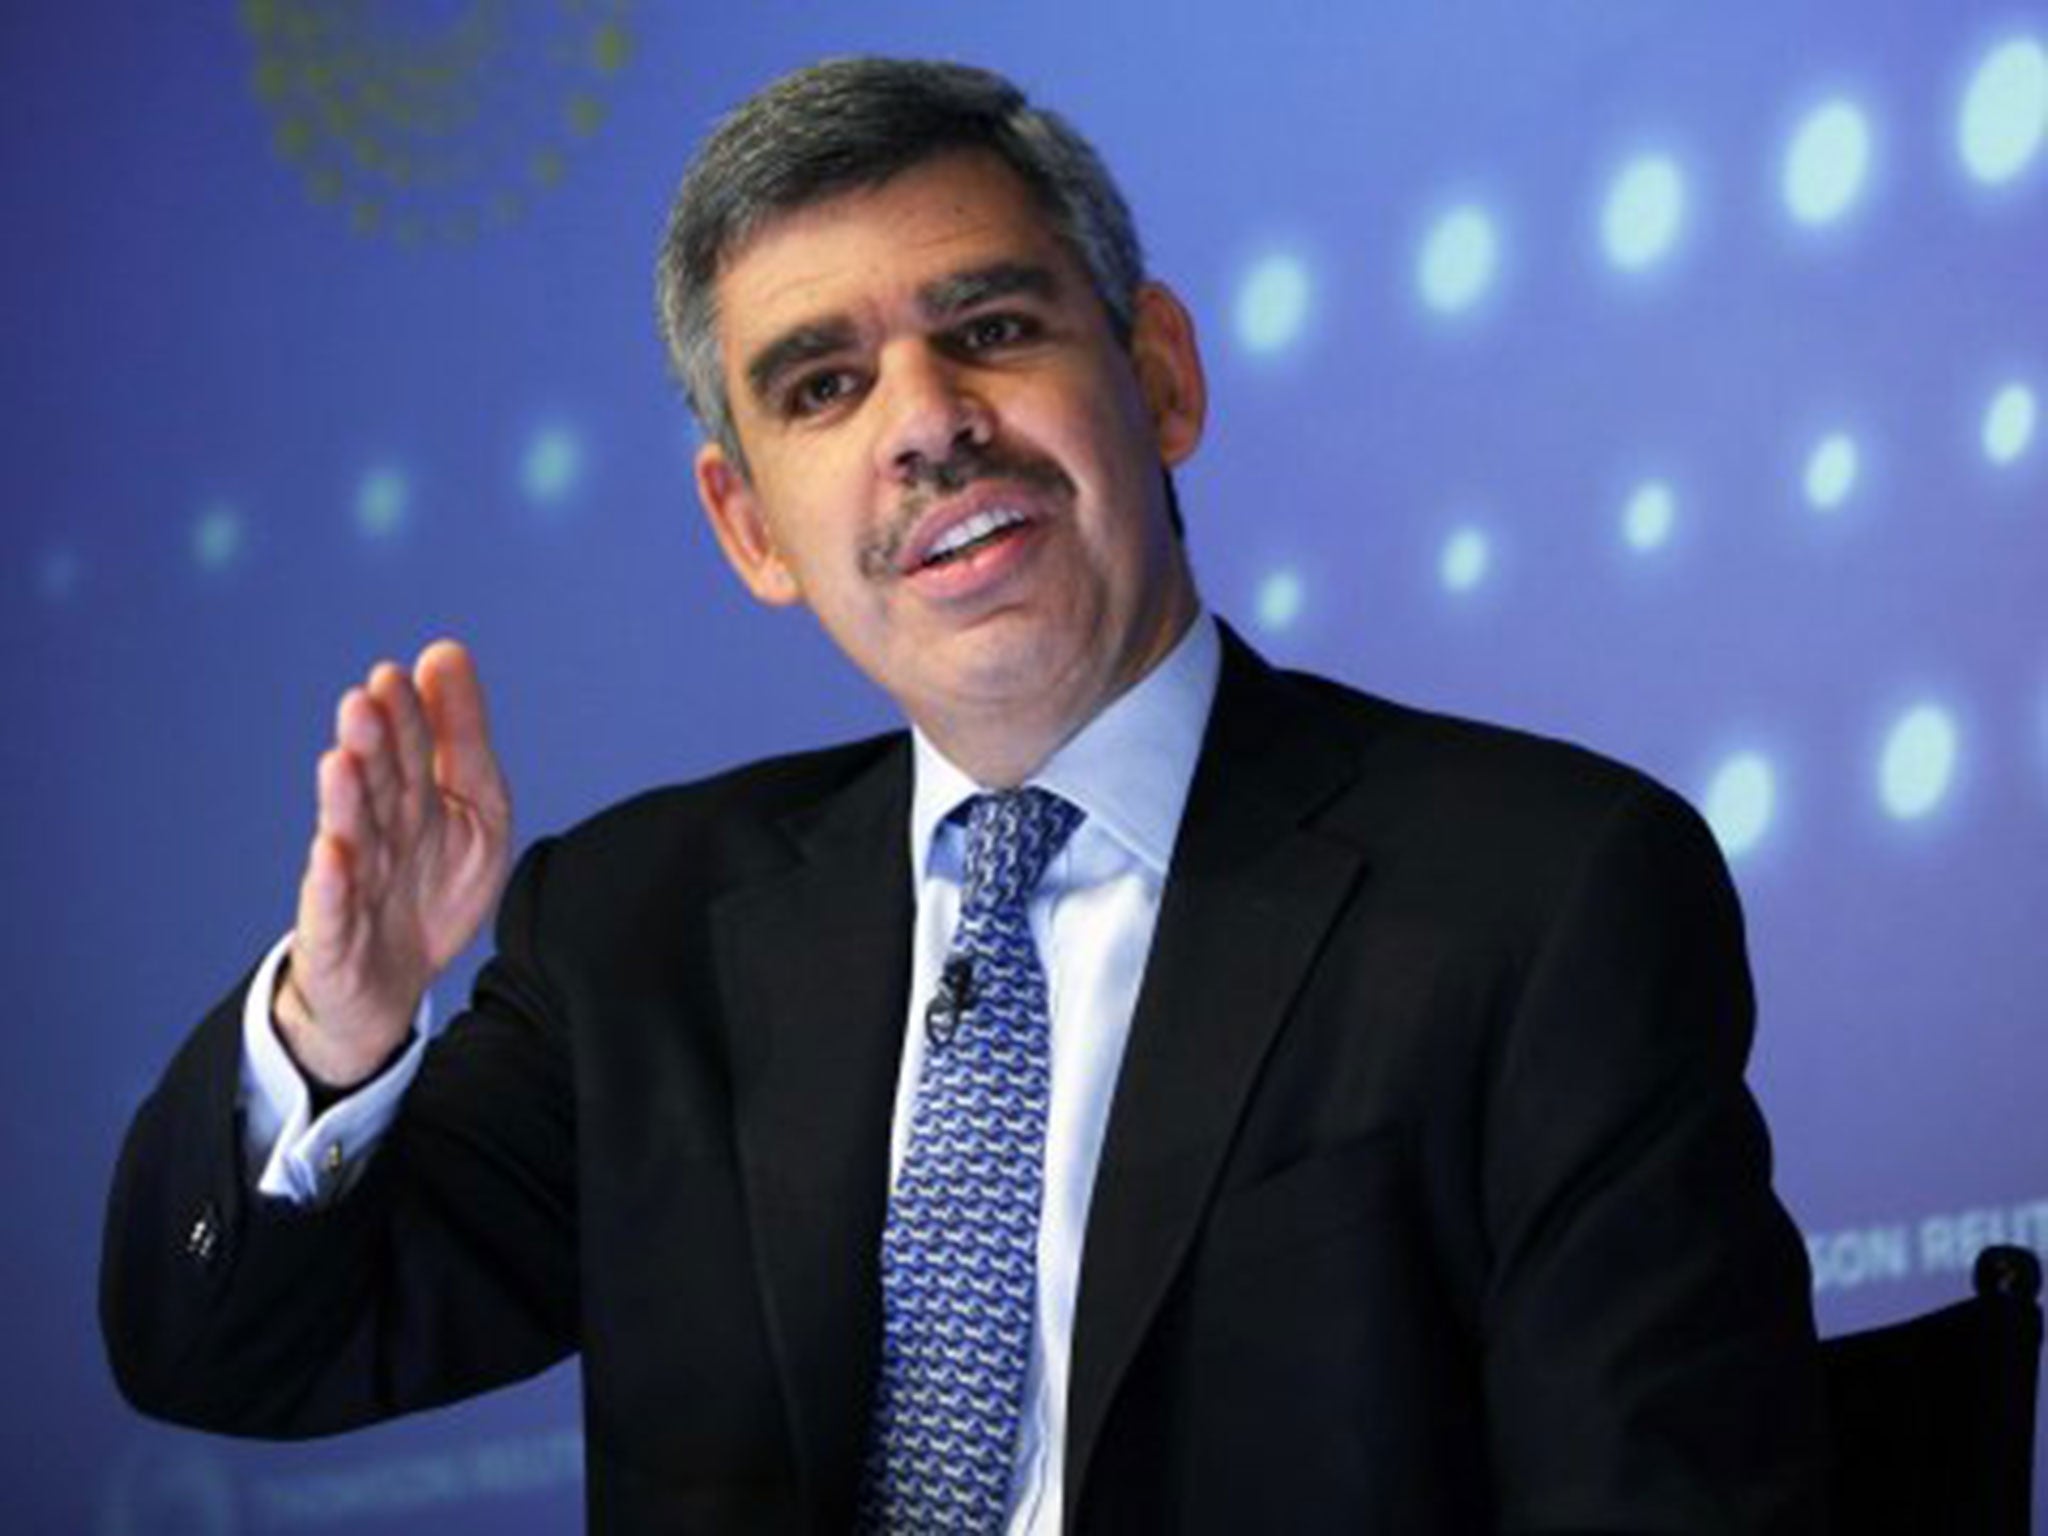 Mr El-Erian's earnings whilst at PIMCO reportedly reached as much as $100m a year